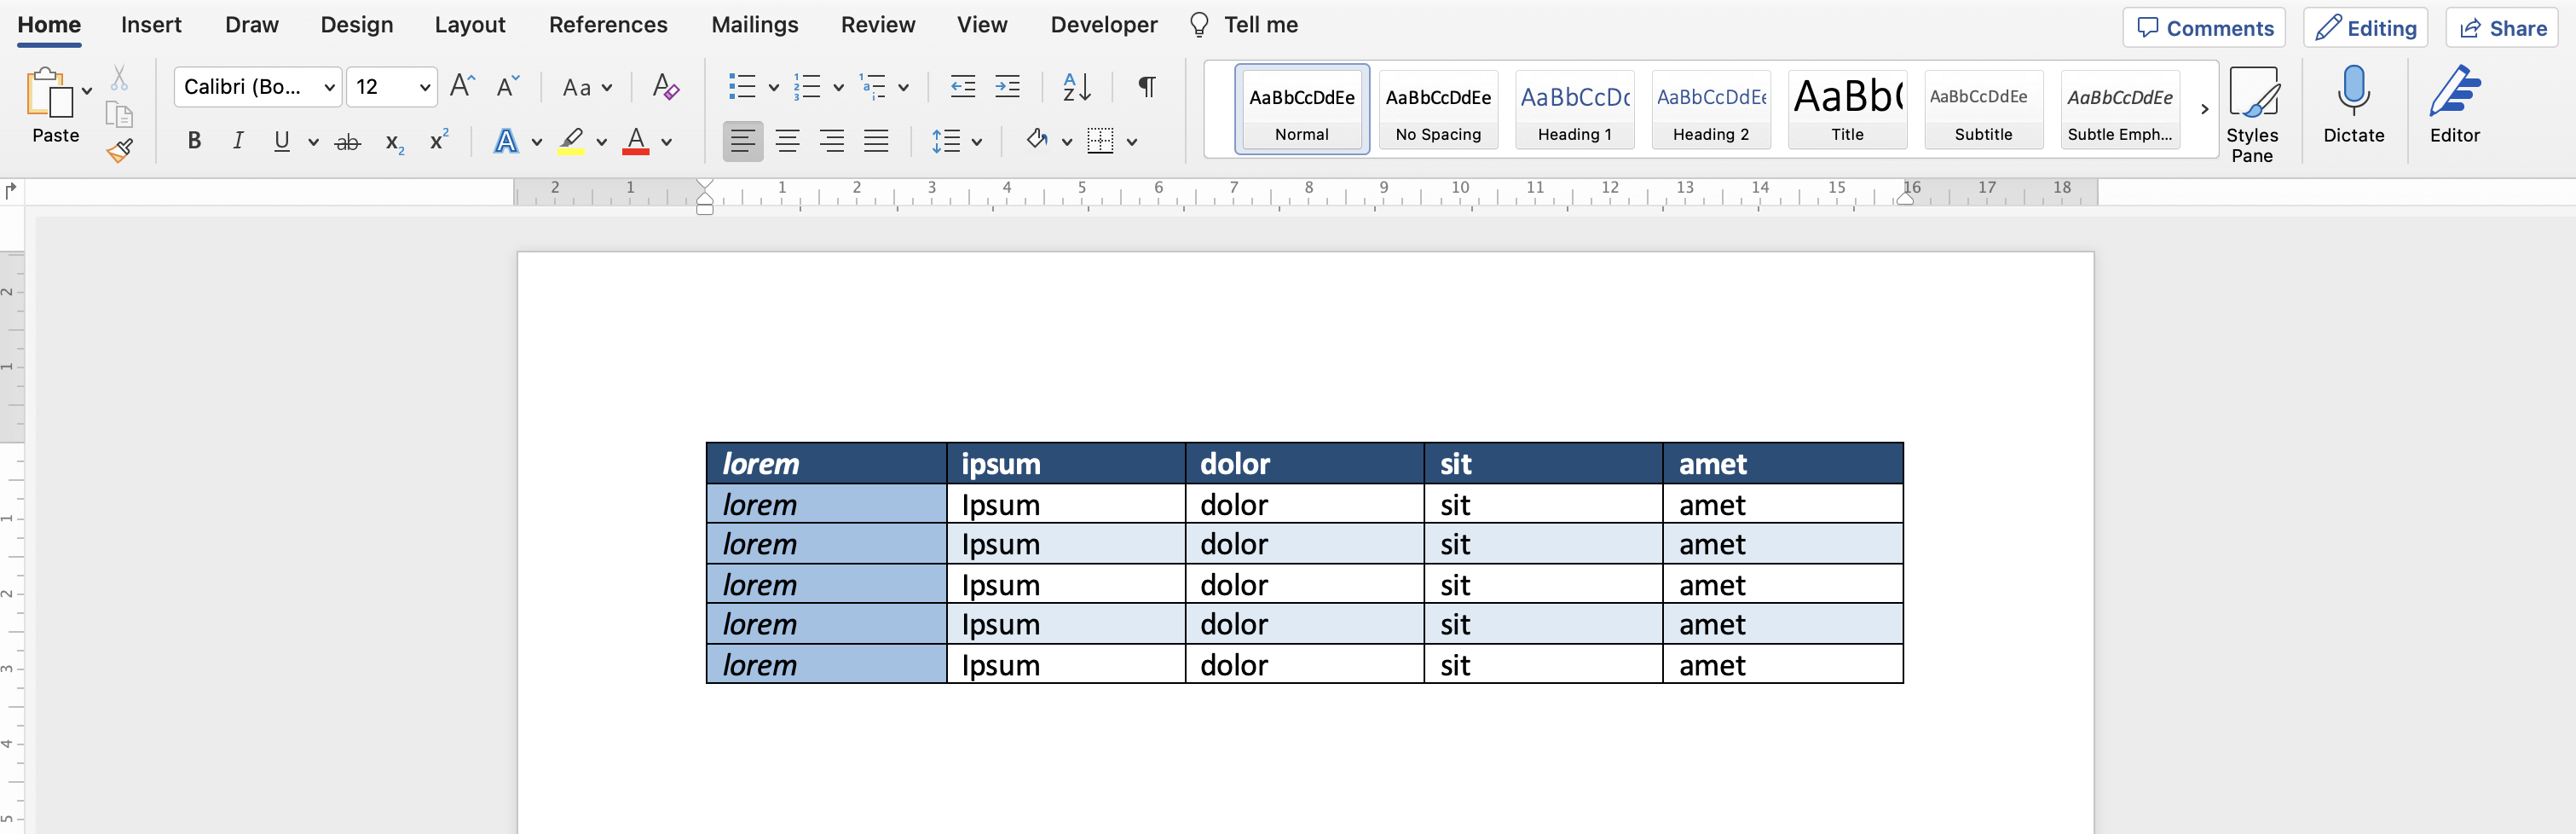 Advanced formatting applied to a table in Microsoft Word.